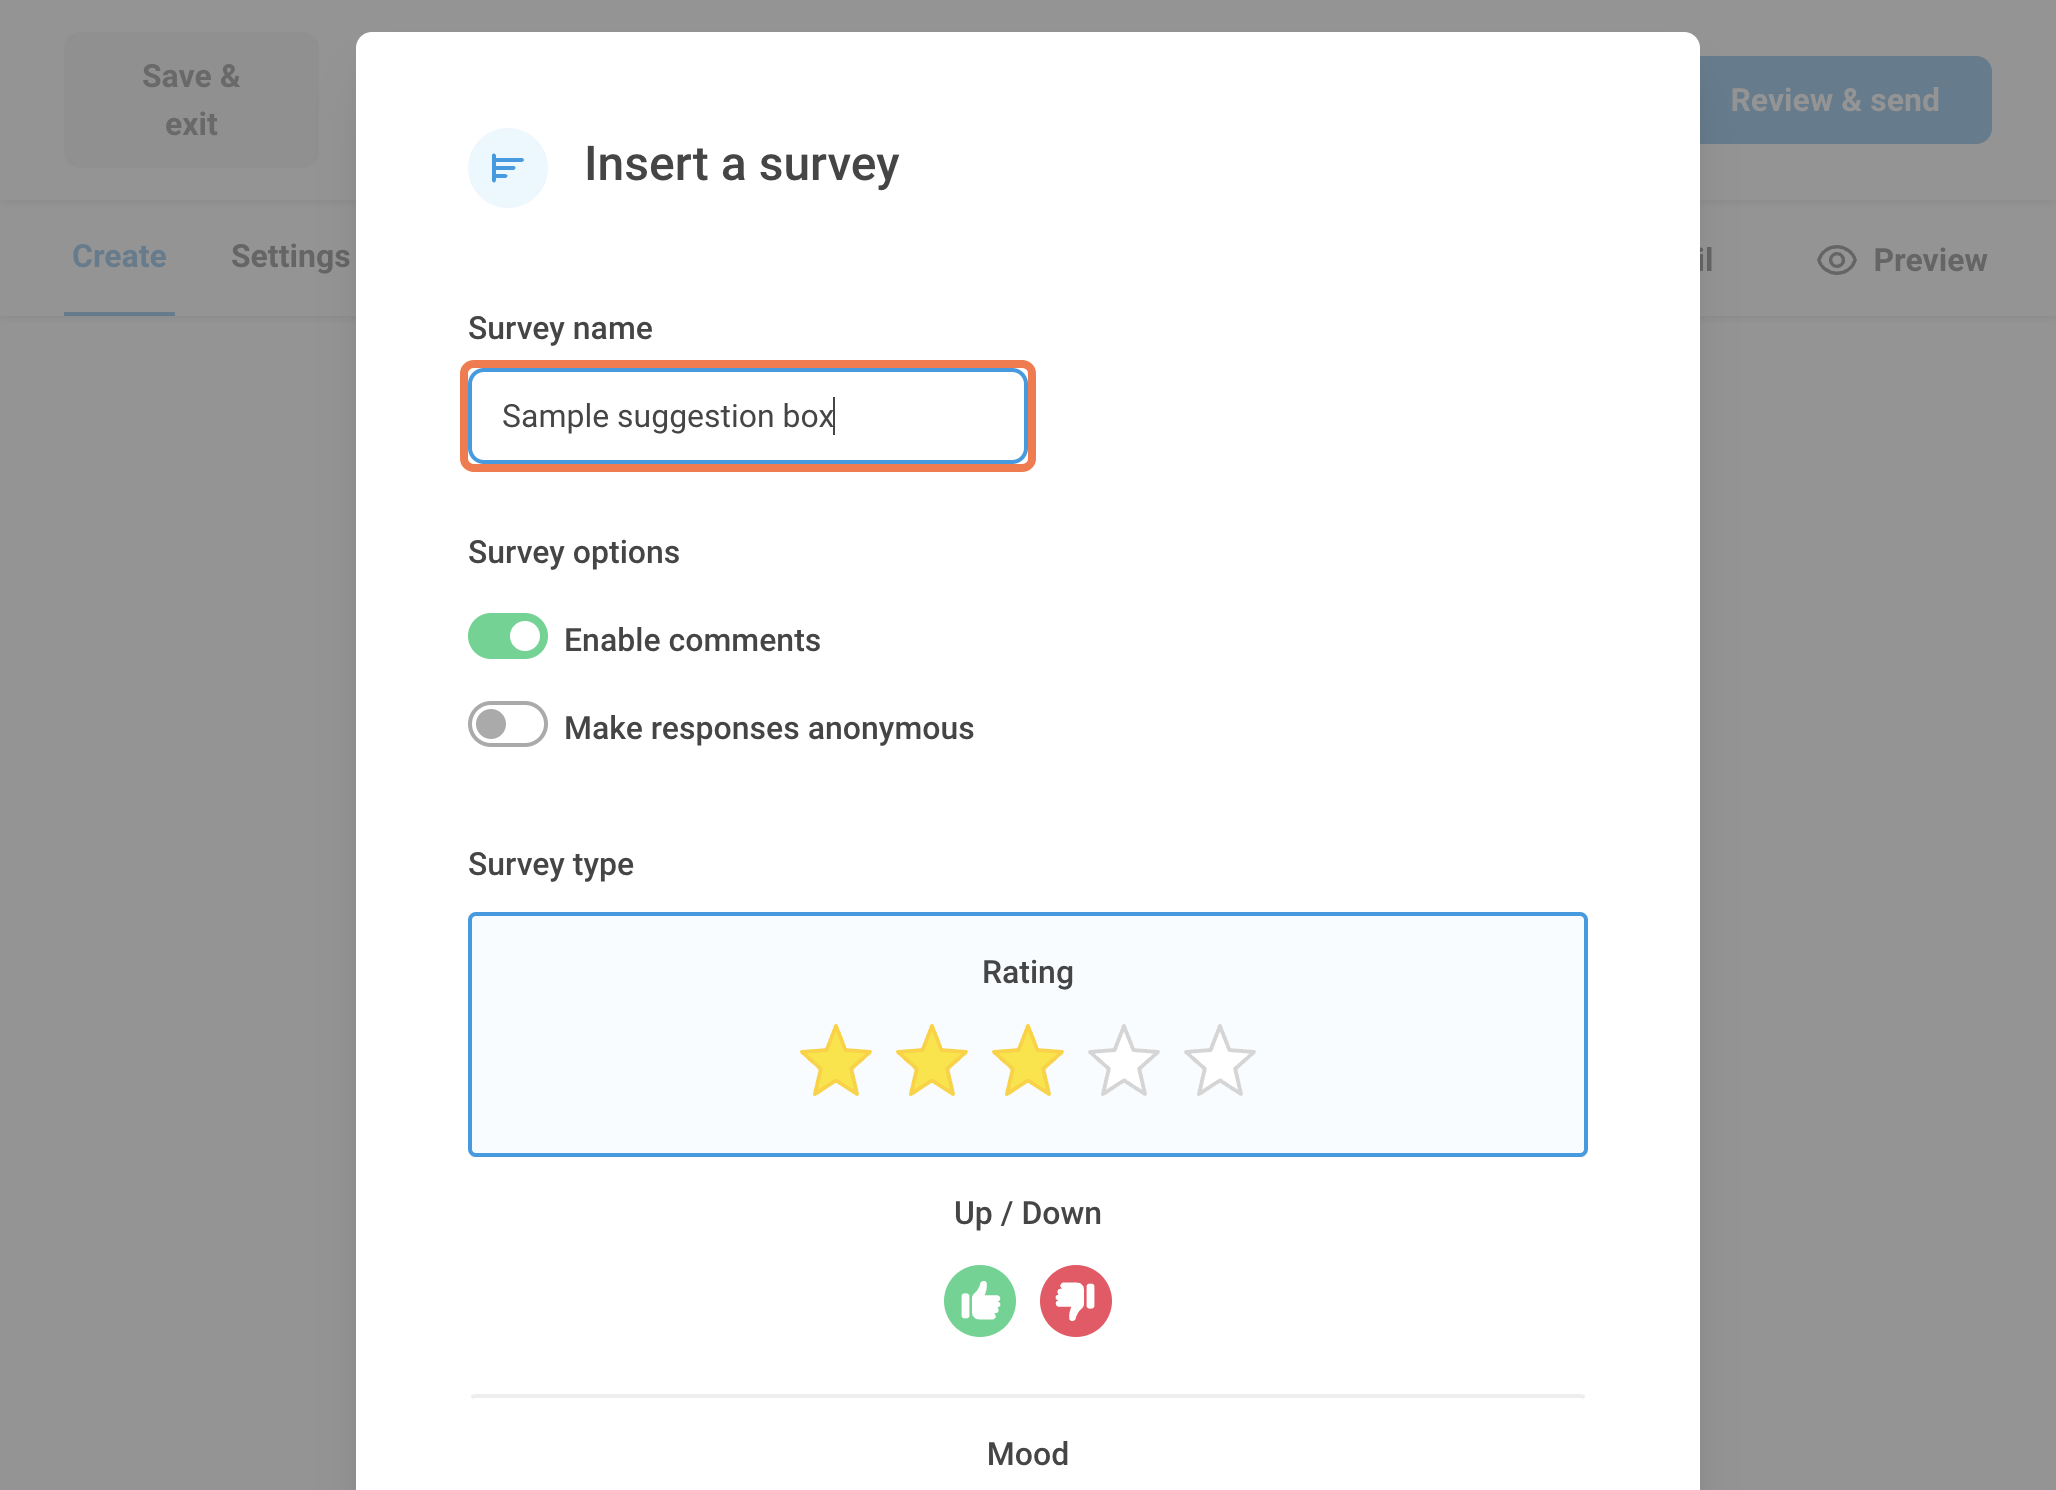 Give your survey a name